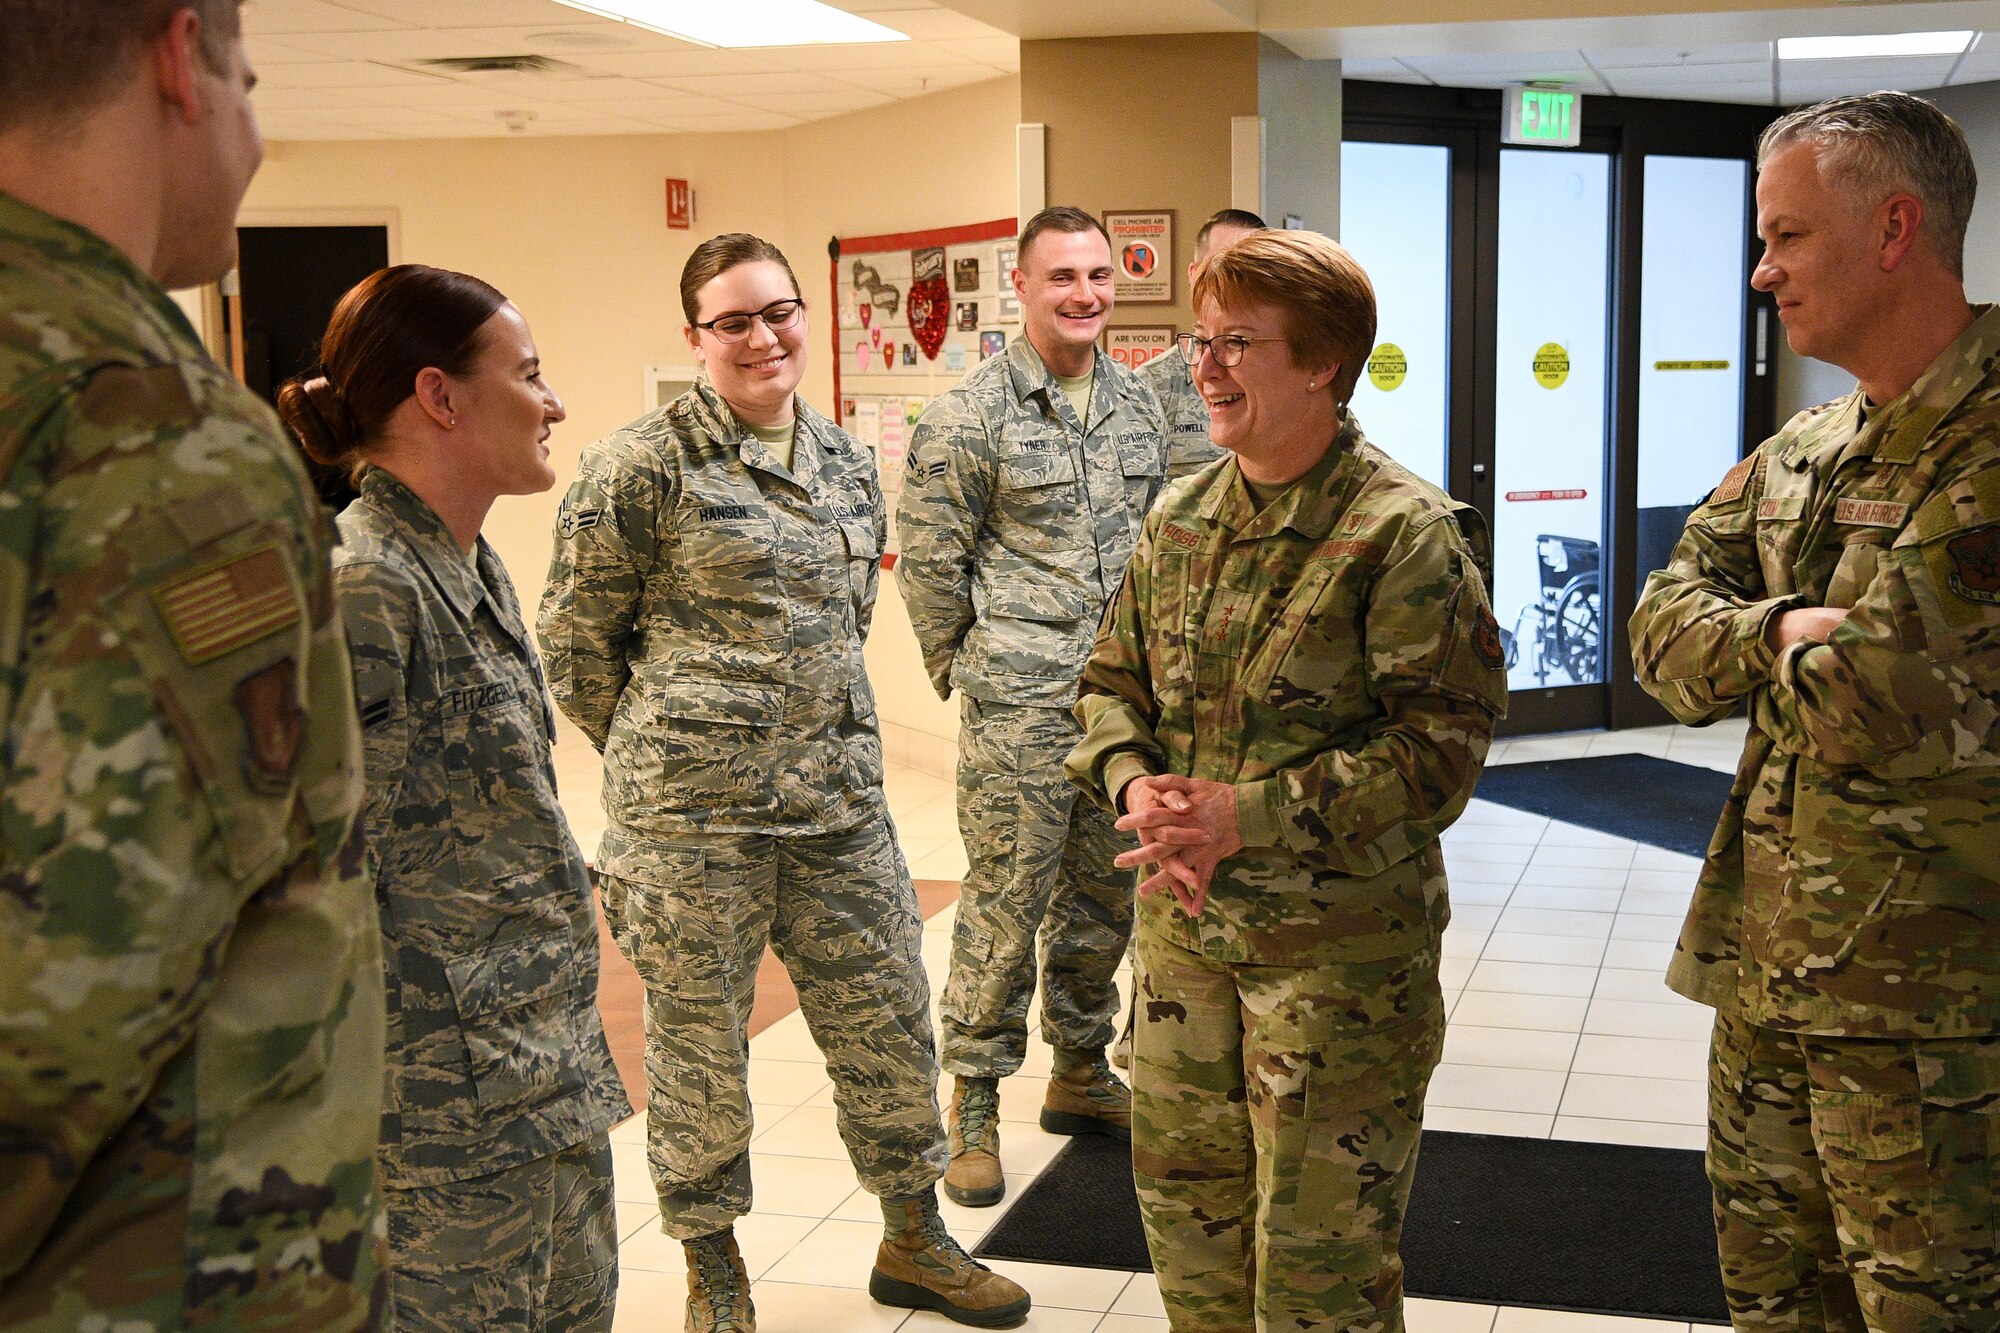 Lt. Gen. Hogg (center) talks with Airman 1st Class Sofia Fitzgerald (left) in the lobby of the medical clinic while others watch on.